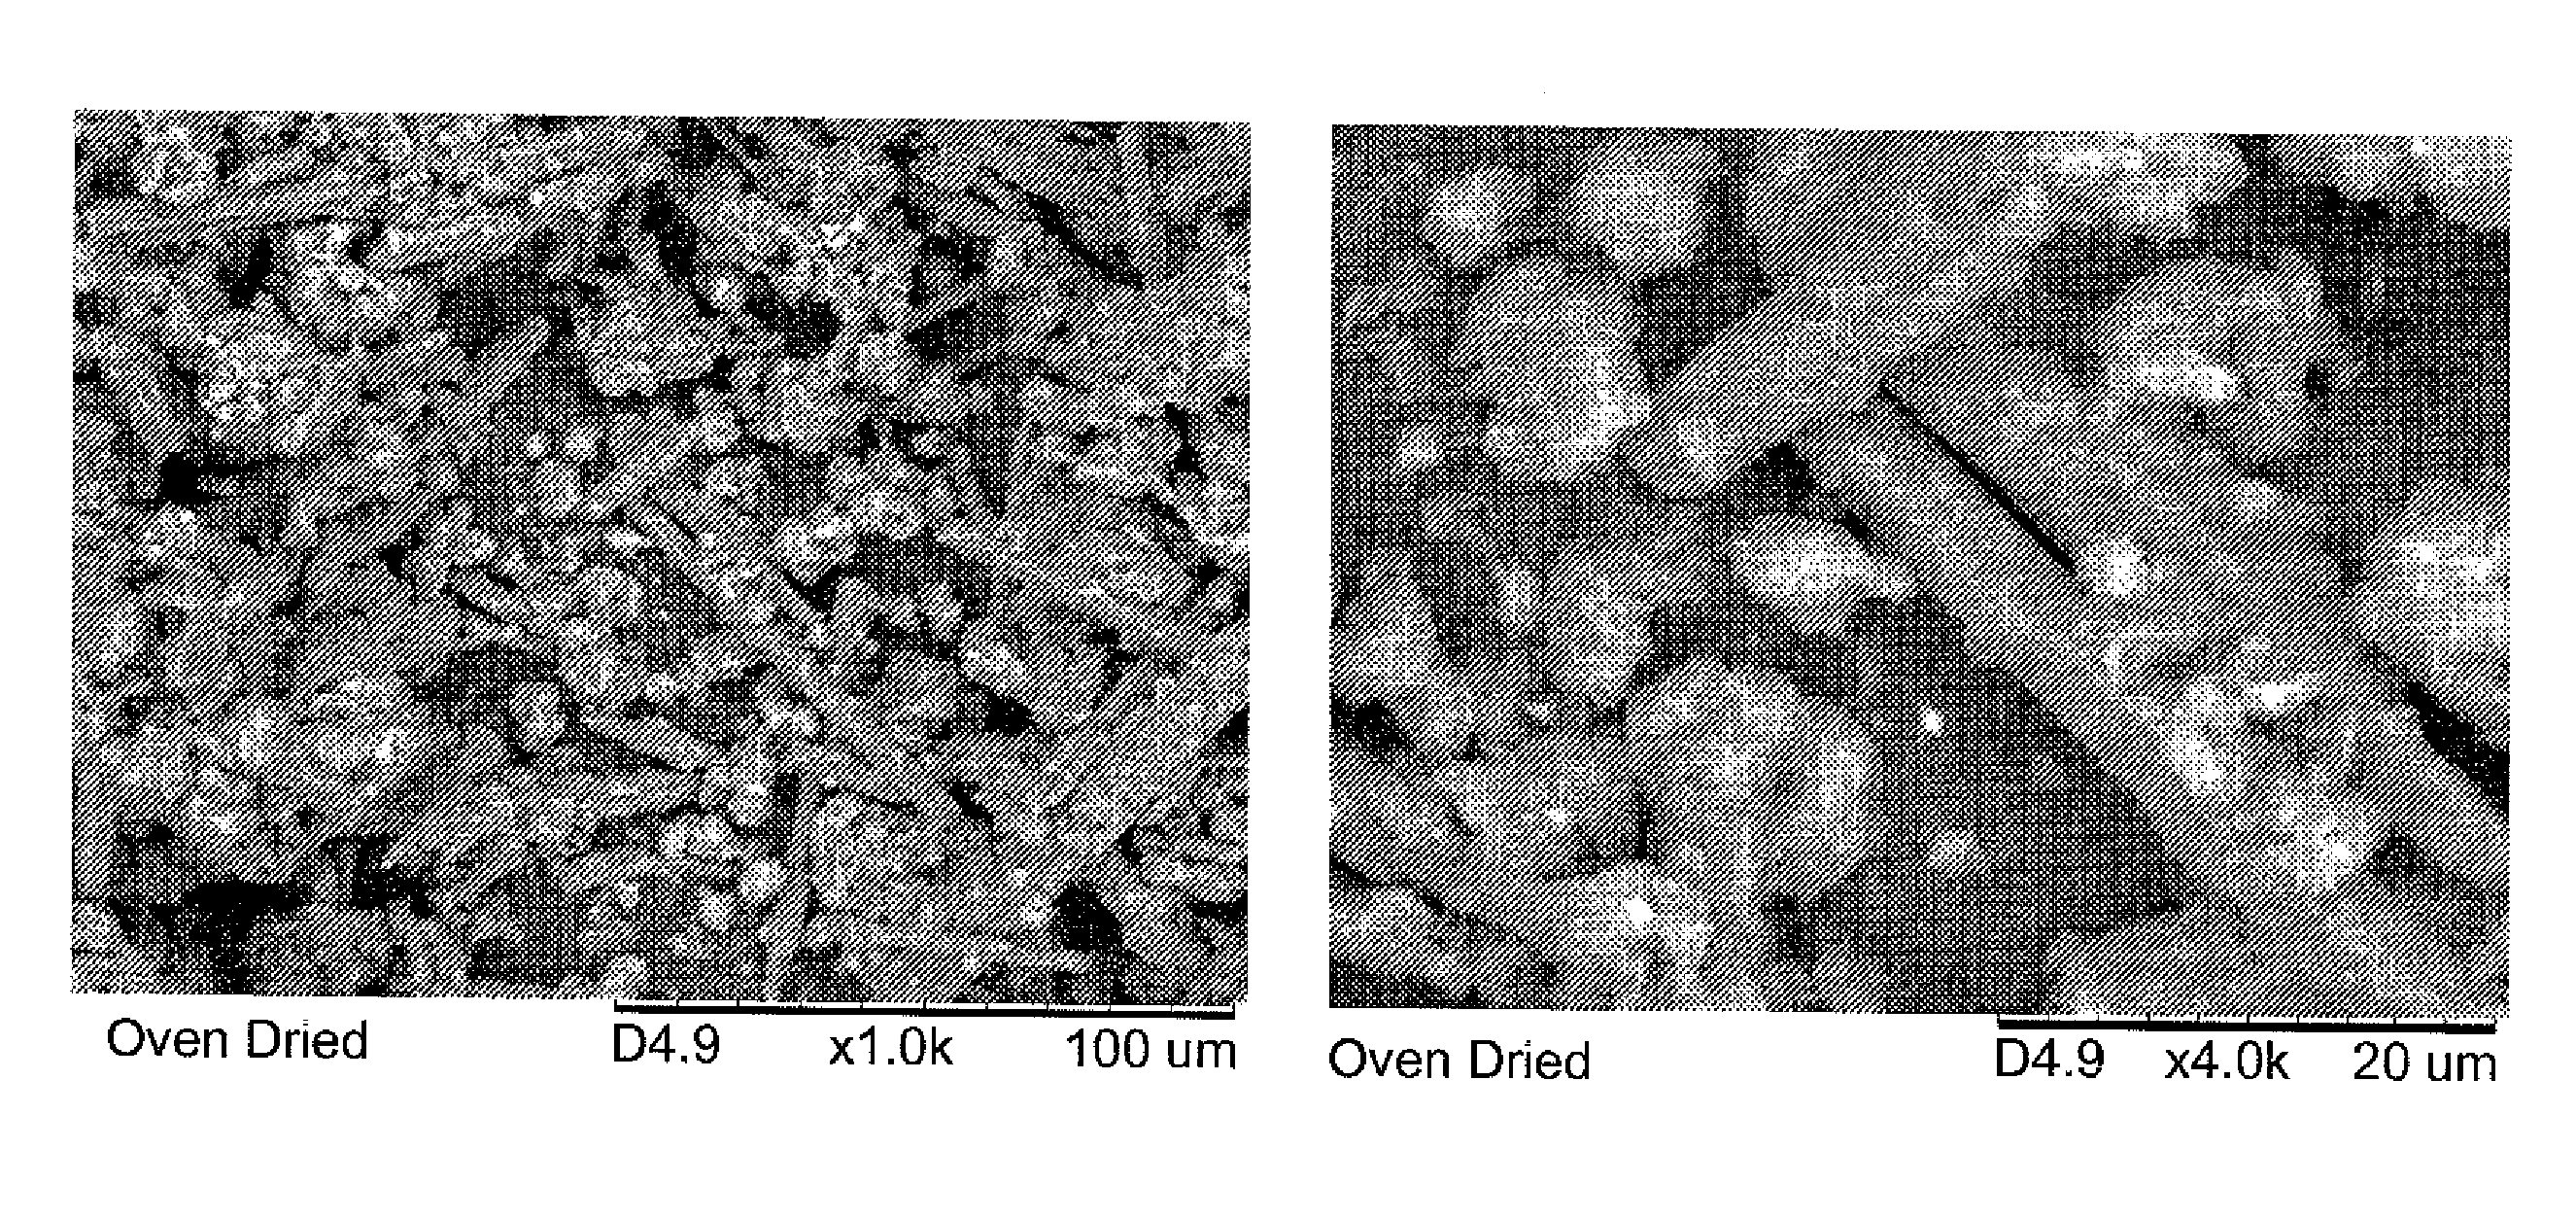 Rocks and Aggregate, and Methods of Making and Using the Same